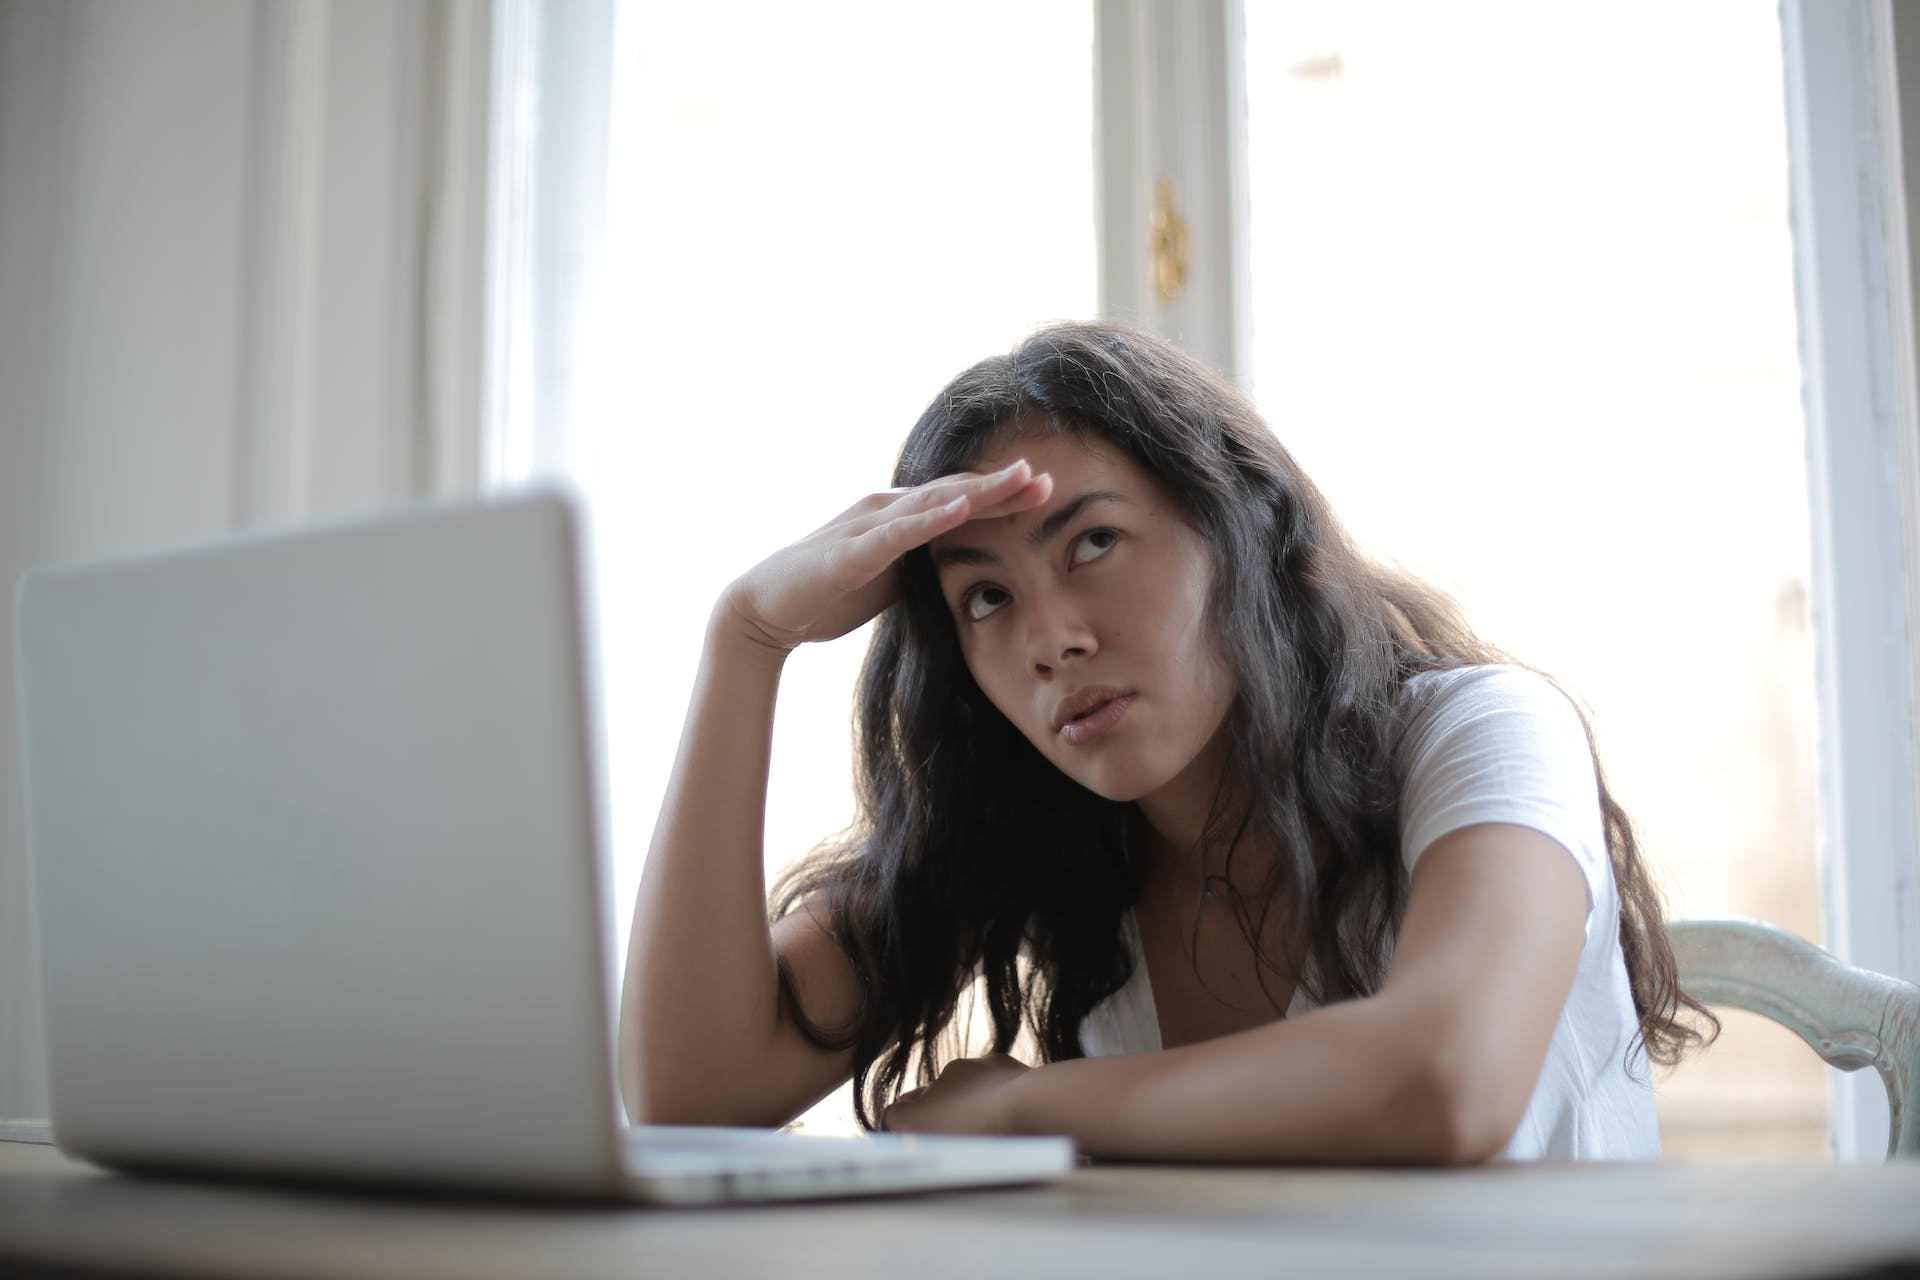 A photograph of a woman sitting in front of a laptop and holding her head while looking to the side as if trying to remember something.